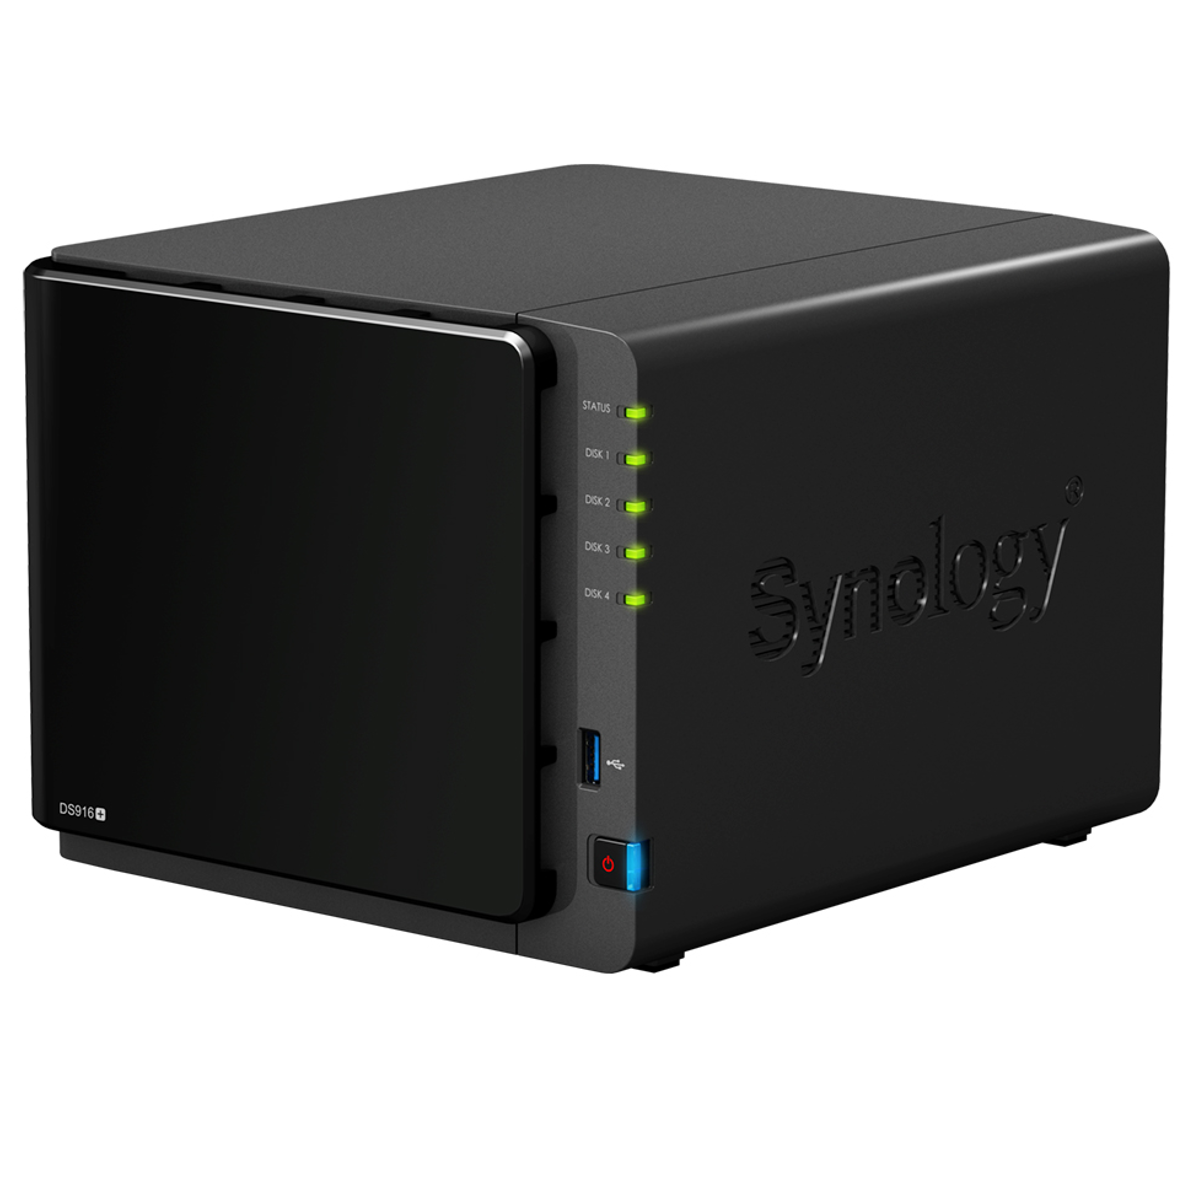 Synology - Synology DiskStation DS916 8GB 4 Bay Network Attached Storage Enclosure